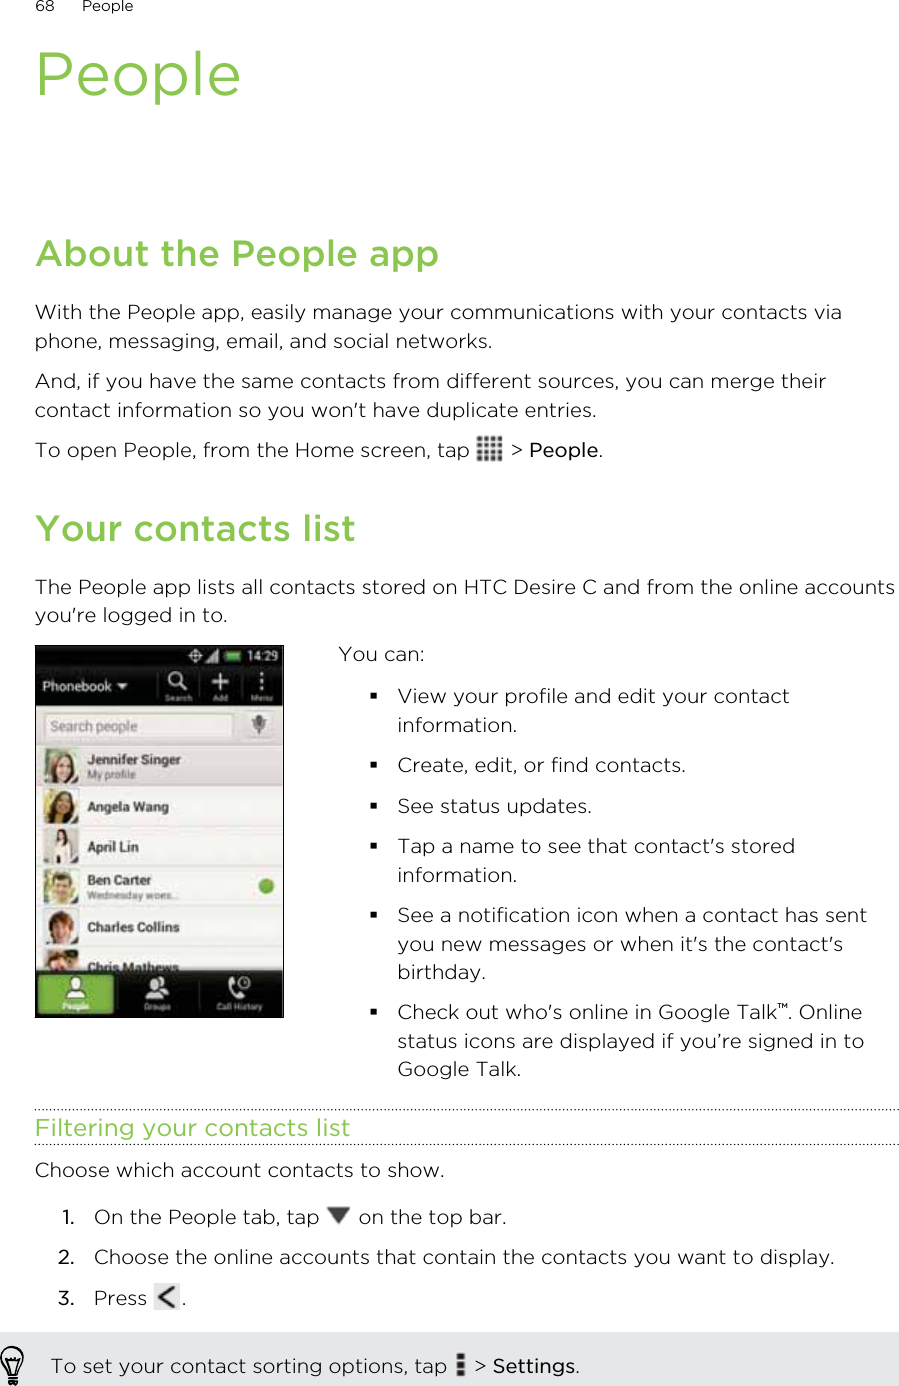 PeopleAbout the People appWith the People app, easily manage your communications with your contacts viaphone, messaging, email, and social networks.And, if you have the same contacts from different sources, you can merge theircontact information so you won&apos;t have duplicate entries.To open People, from the Home screen, tap   &gt; People.Your contacts listThe People app lists all contacts stored on HTC Desire C and from the online accountsyou&apos;re logged in to.You can:View your profile and edit your contactinformation.Create, edit, or find contacts.See status updates.Tap a name to see that contact&apos;s storedinformation.See a notification icon when a contact has sentyou new messages or when it&apos;s the contact&apos;sbirthday.Check out who&apos;s online in Google Talk™. Onlinestatus icons are displayed if you’re signed in toGoogle Talk.Filtering your contacts listChoose which account contacts to show.1. On the People tab, tap   on the top bar.2. Choose the online accounts that contain the contacts you want to display.3. Press  .To set your contact sorting options, tap   &gt; Settings.68 People